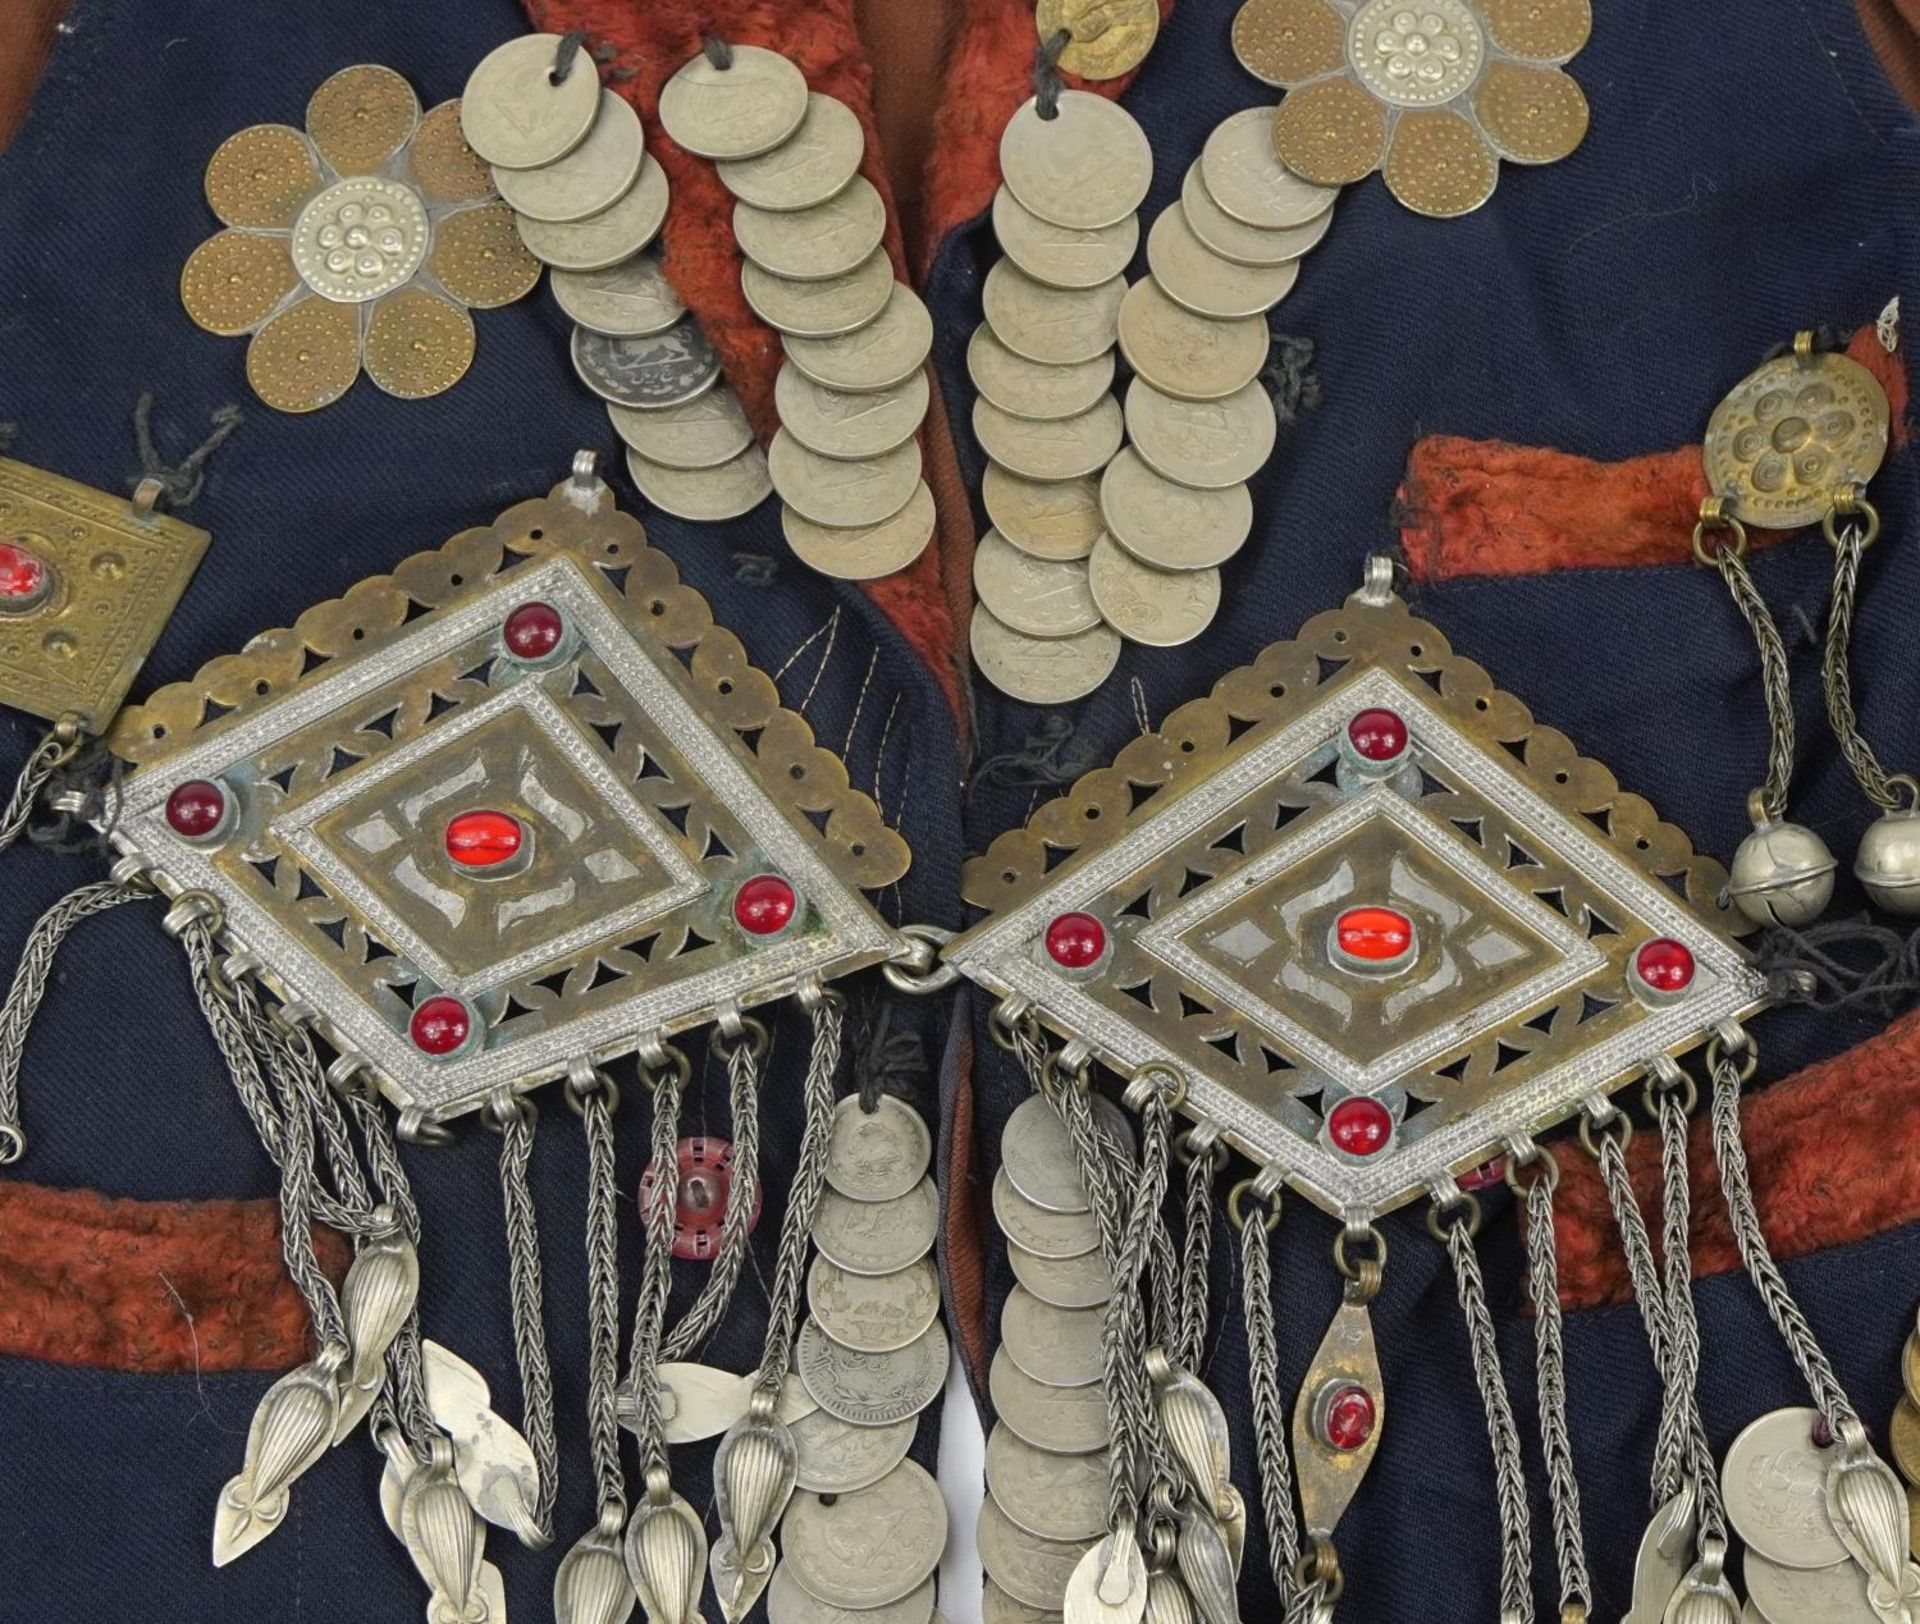 Persian coin set waistcoat with white metal talismans and coins, 59cm high - Image 2 of 3